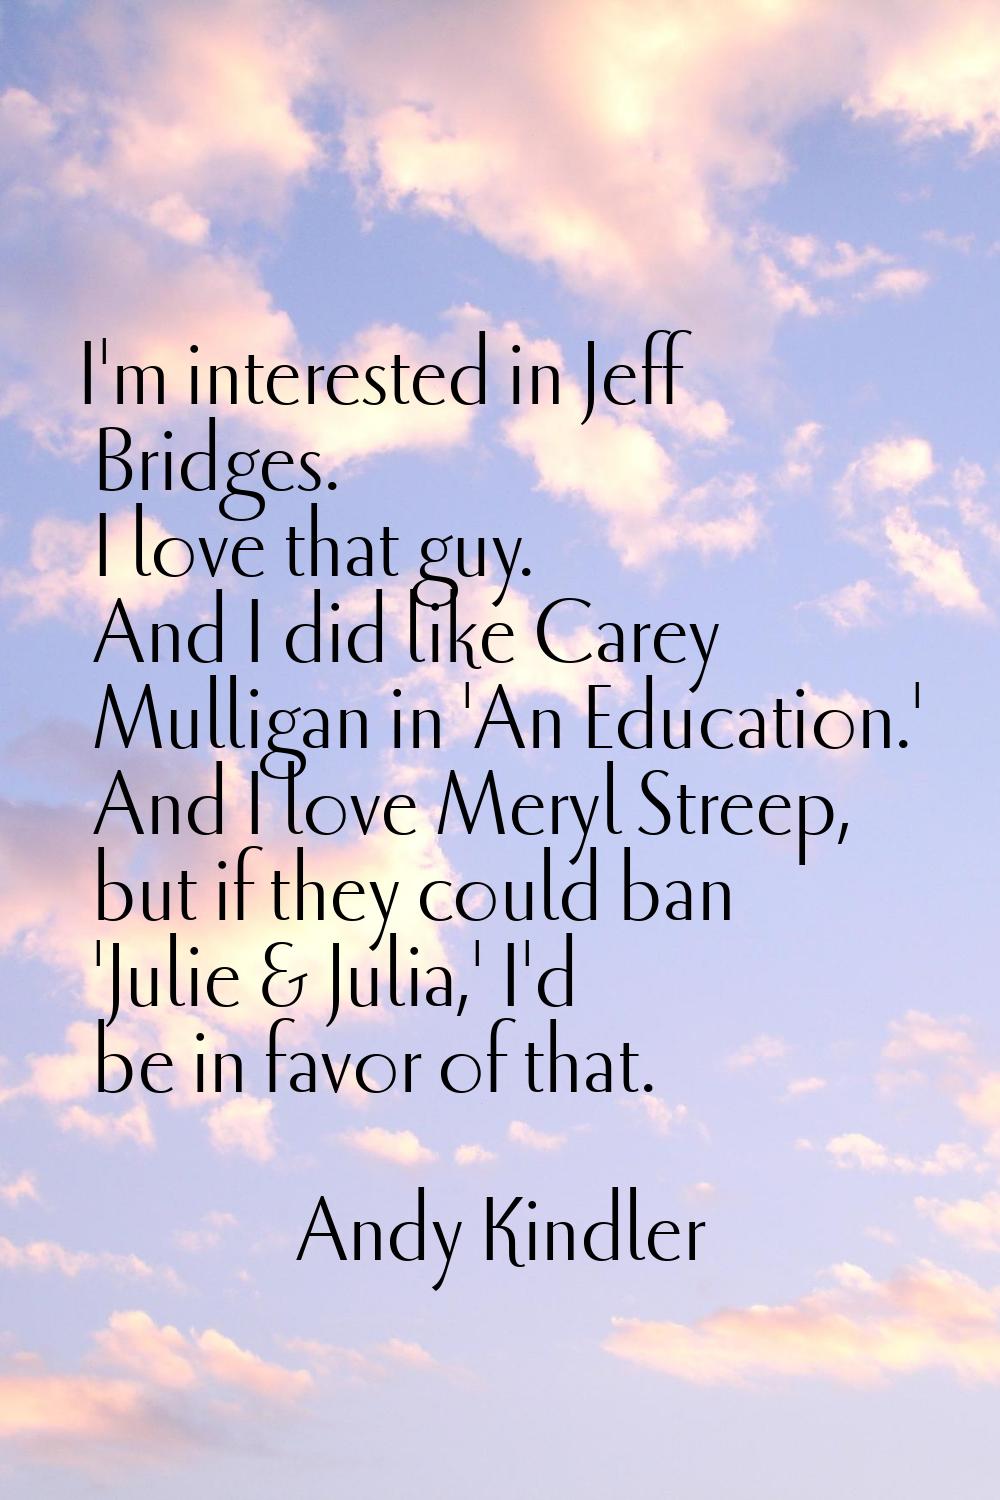 I'm interested in Jeff Bridges. I love that guy. And I did like Carey Mulligan in 'An Education.' A